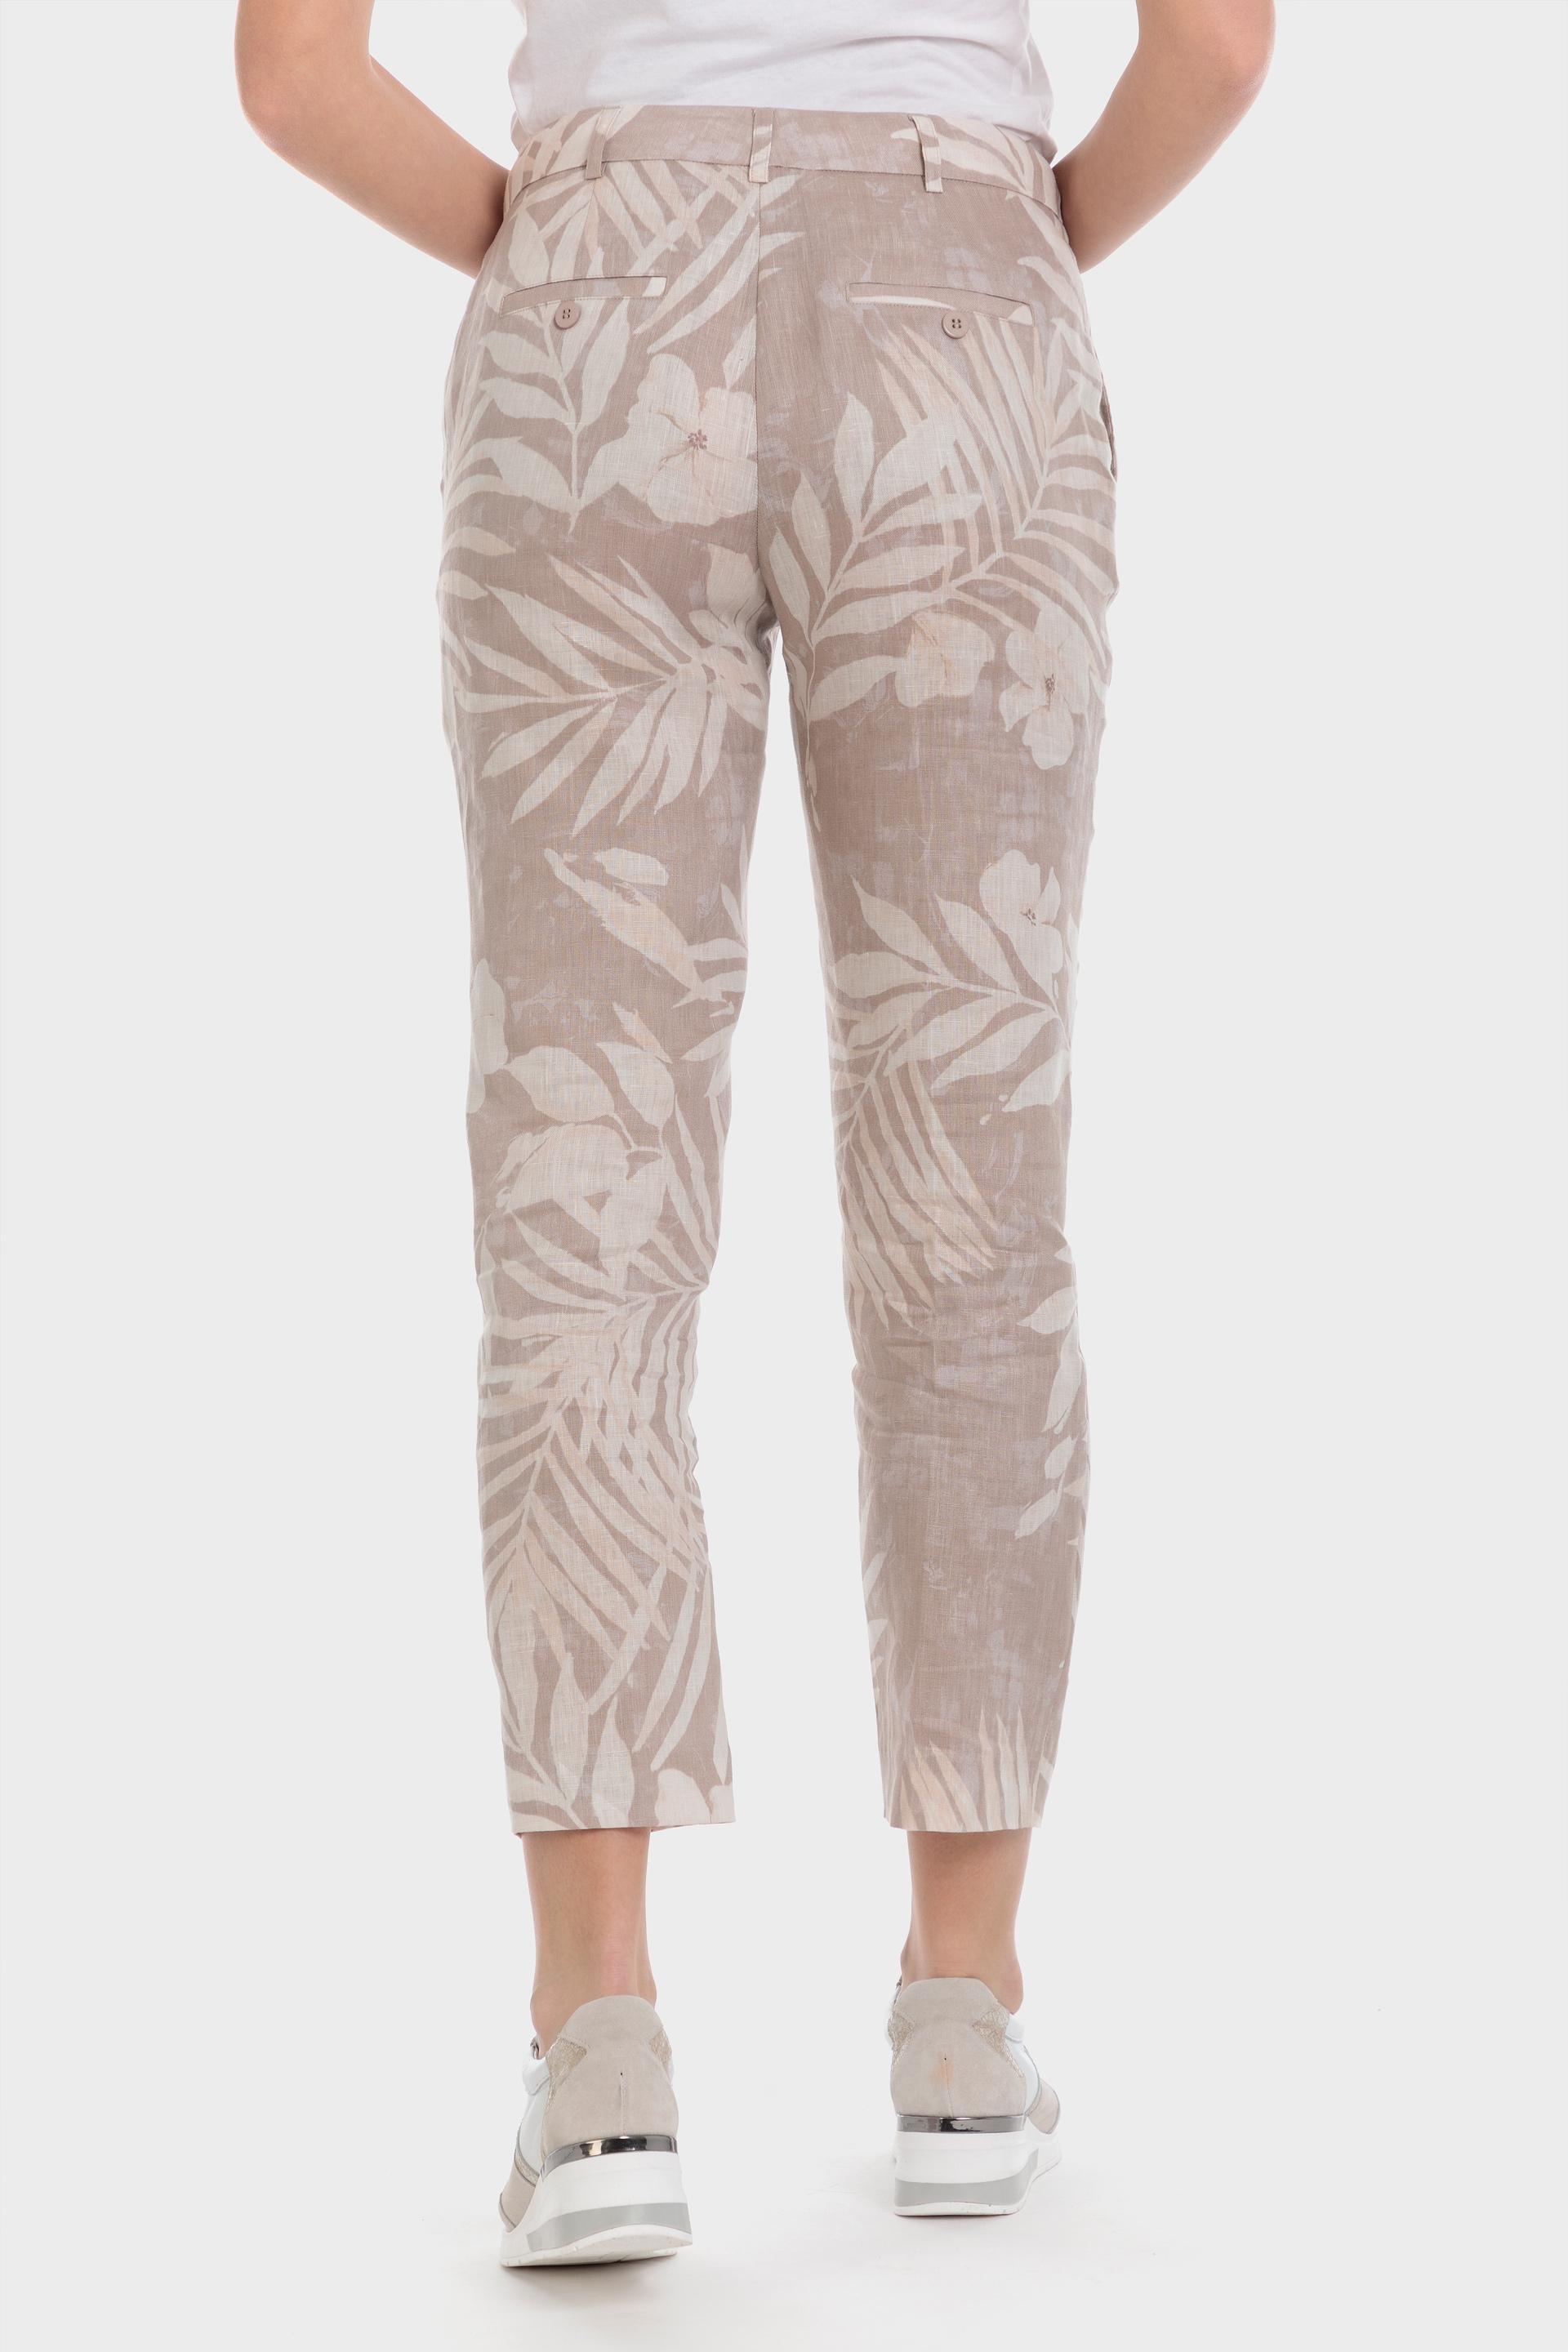 Punt Roma - Grey Printed Linen Trousers